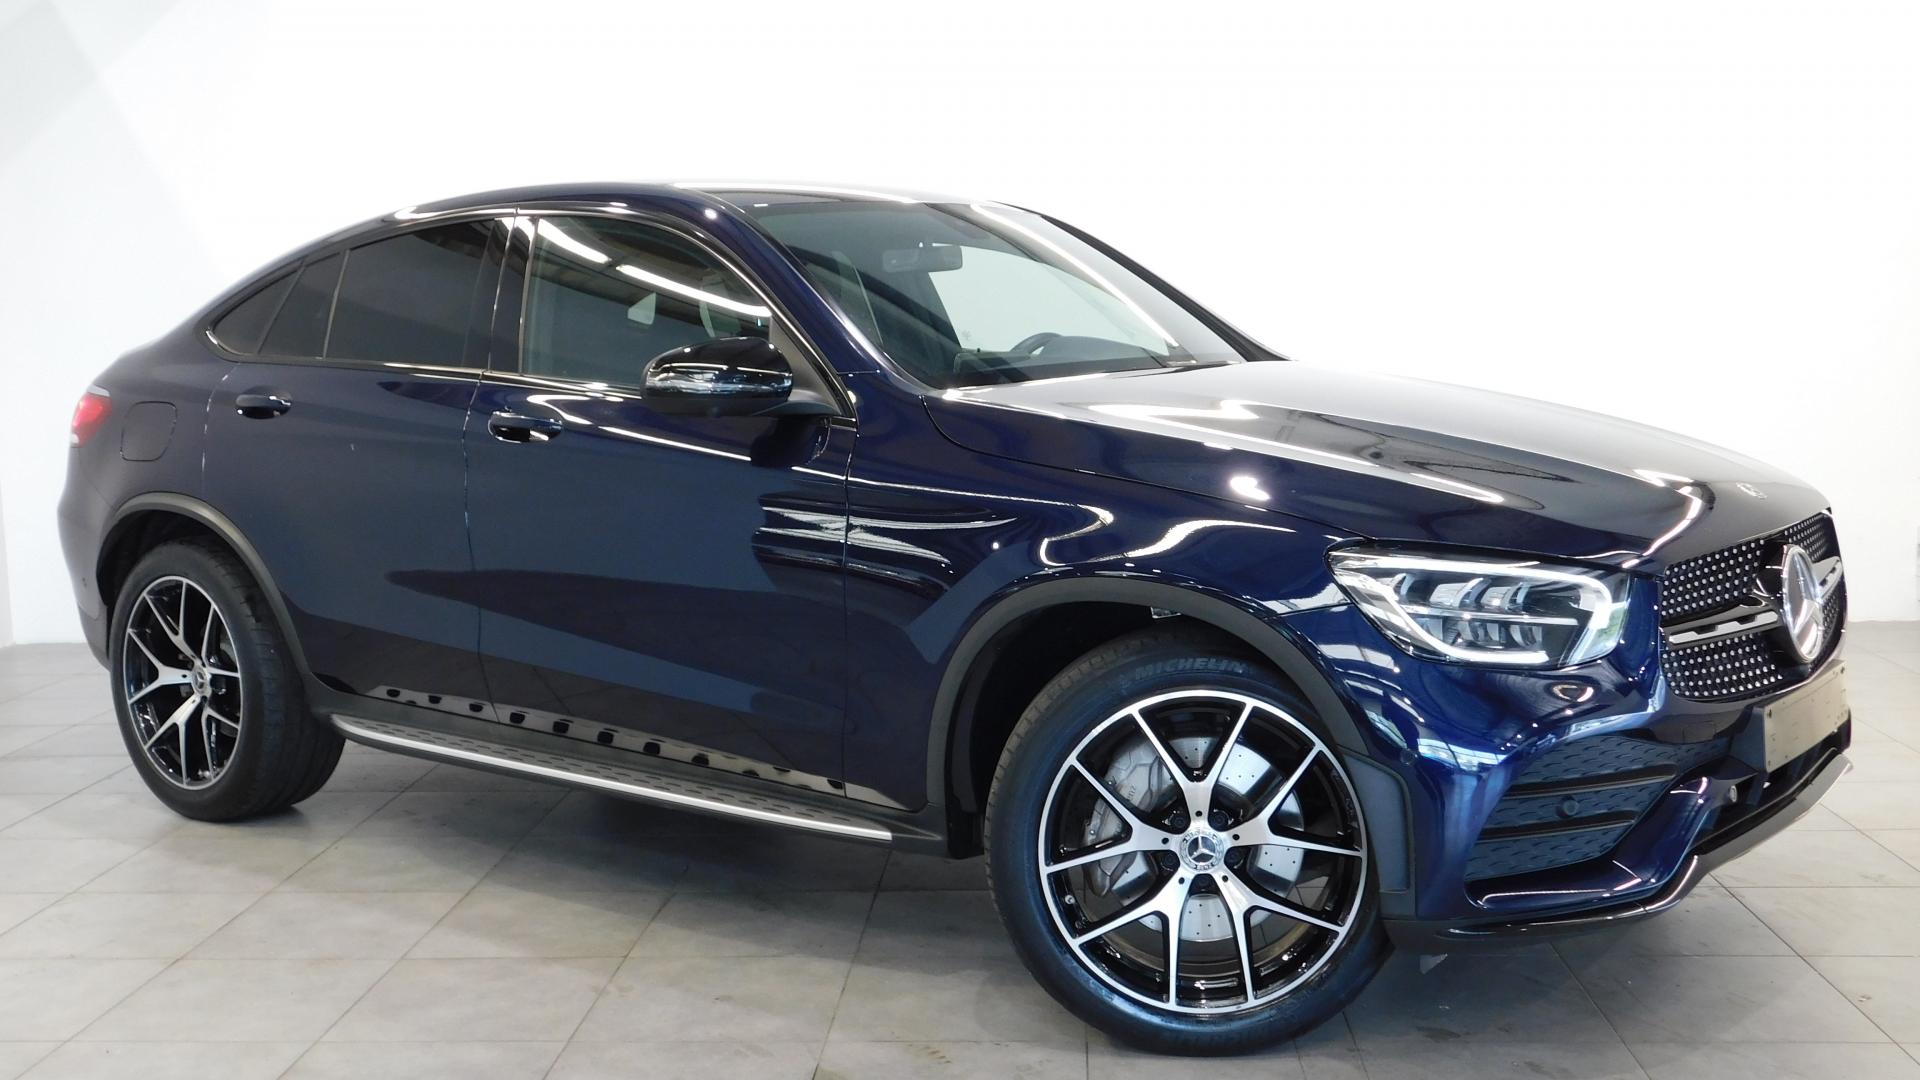 MERCEDES GLC COUPE 220 d - BV 9G-Tronic AMG Line 4-Matic PHASE 2